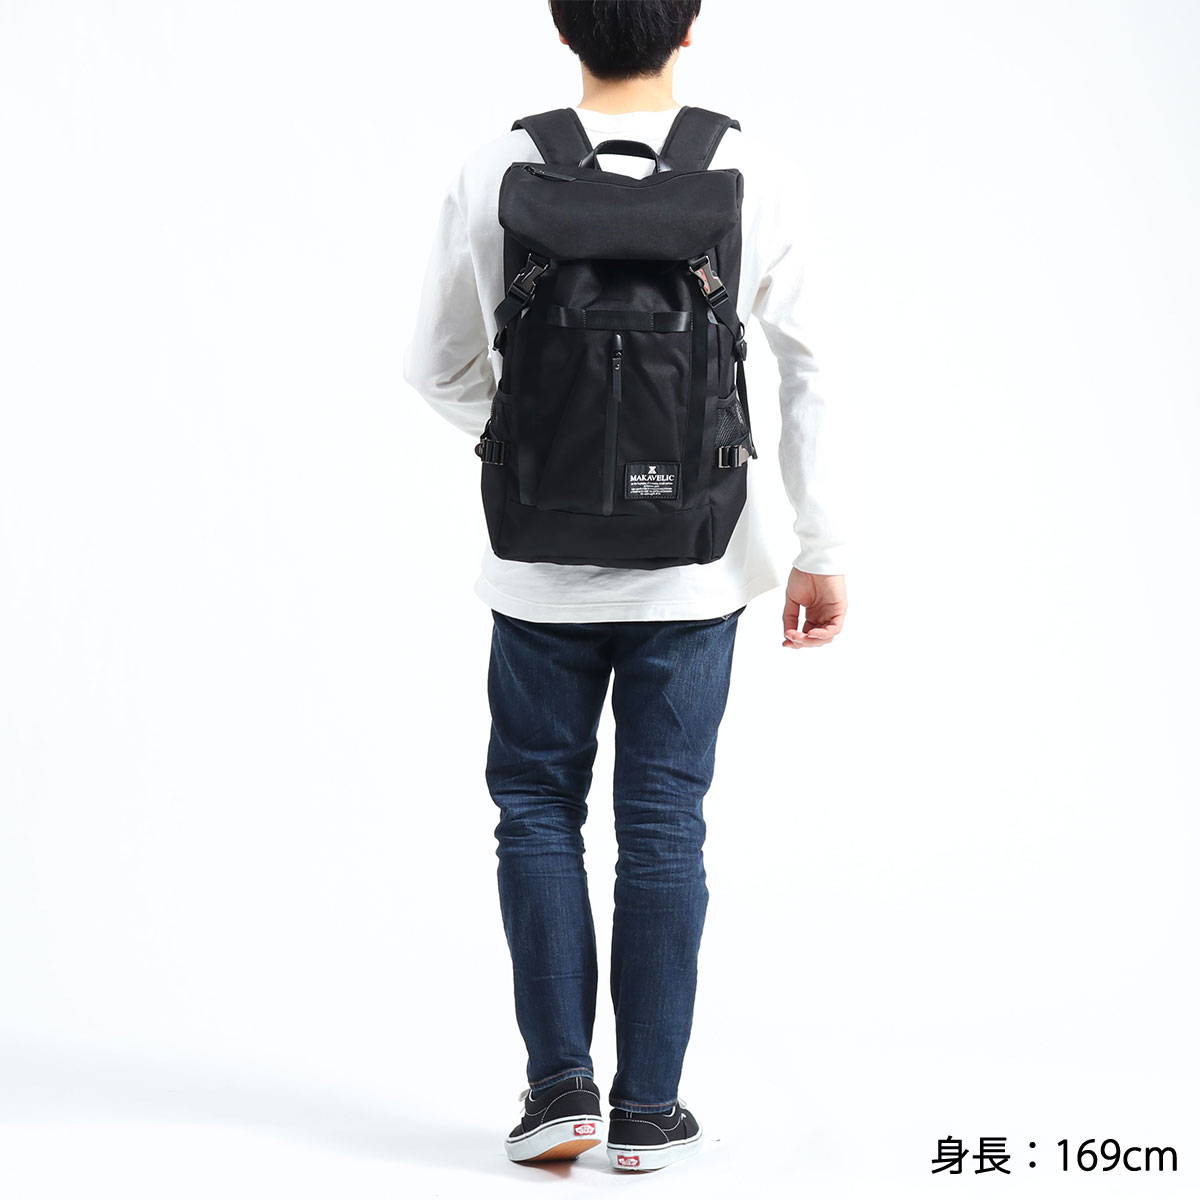 MAKAVELIC マキャベリック CHASE DOUBLE LINE 2 BACKPACK 3120-10126